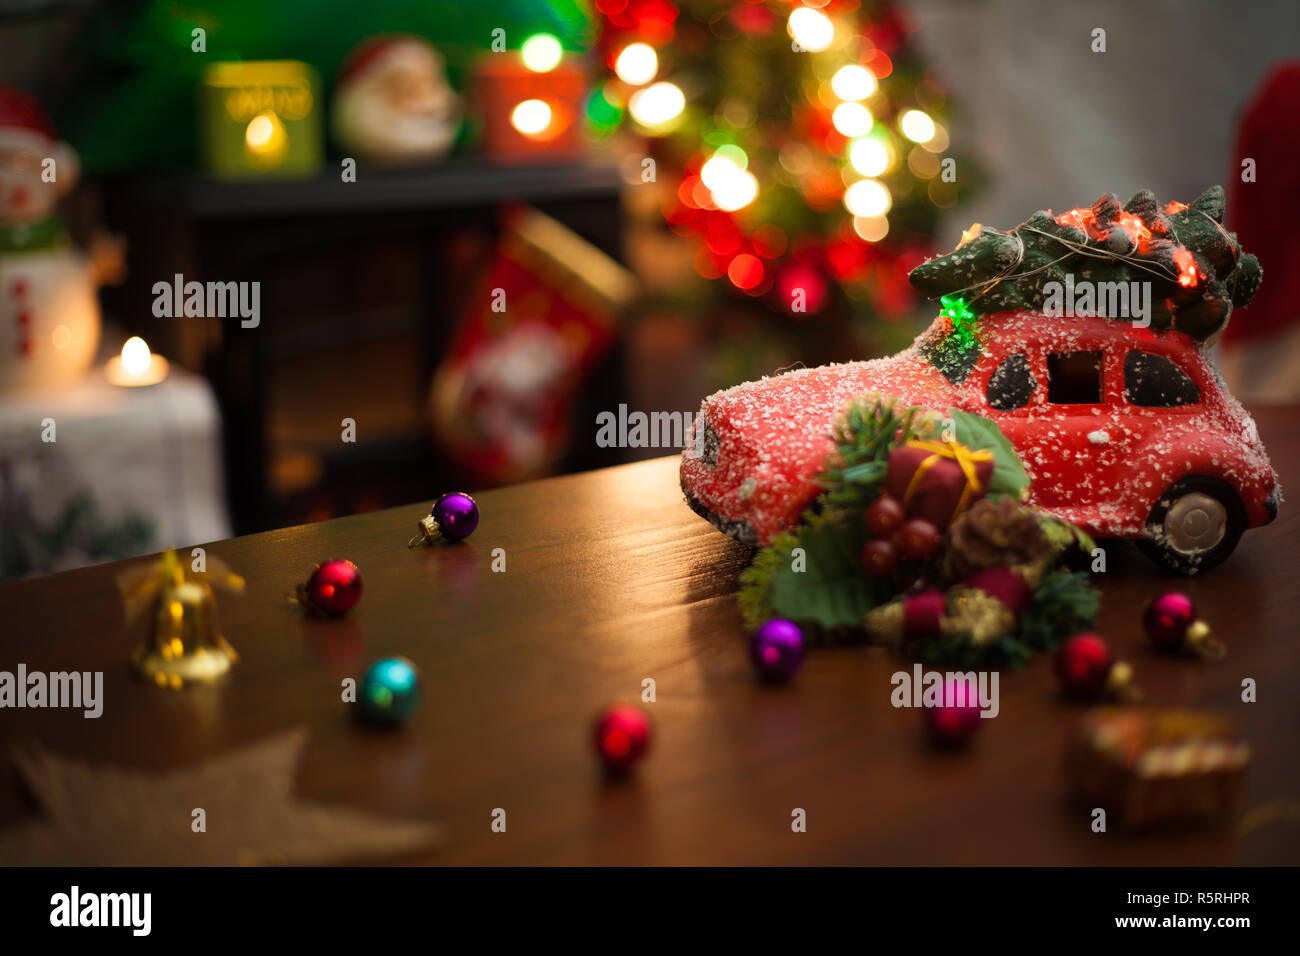 Christmas Decoration Background With Christmas Tree On Top